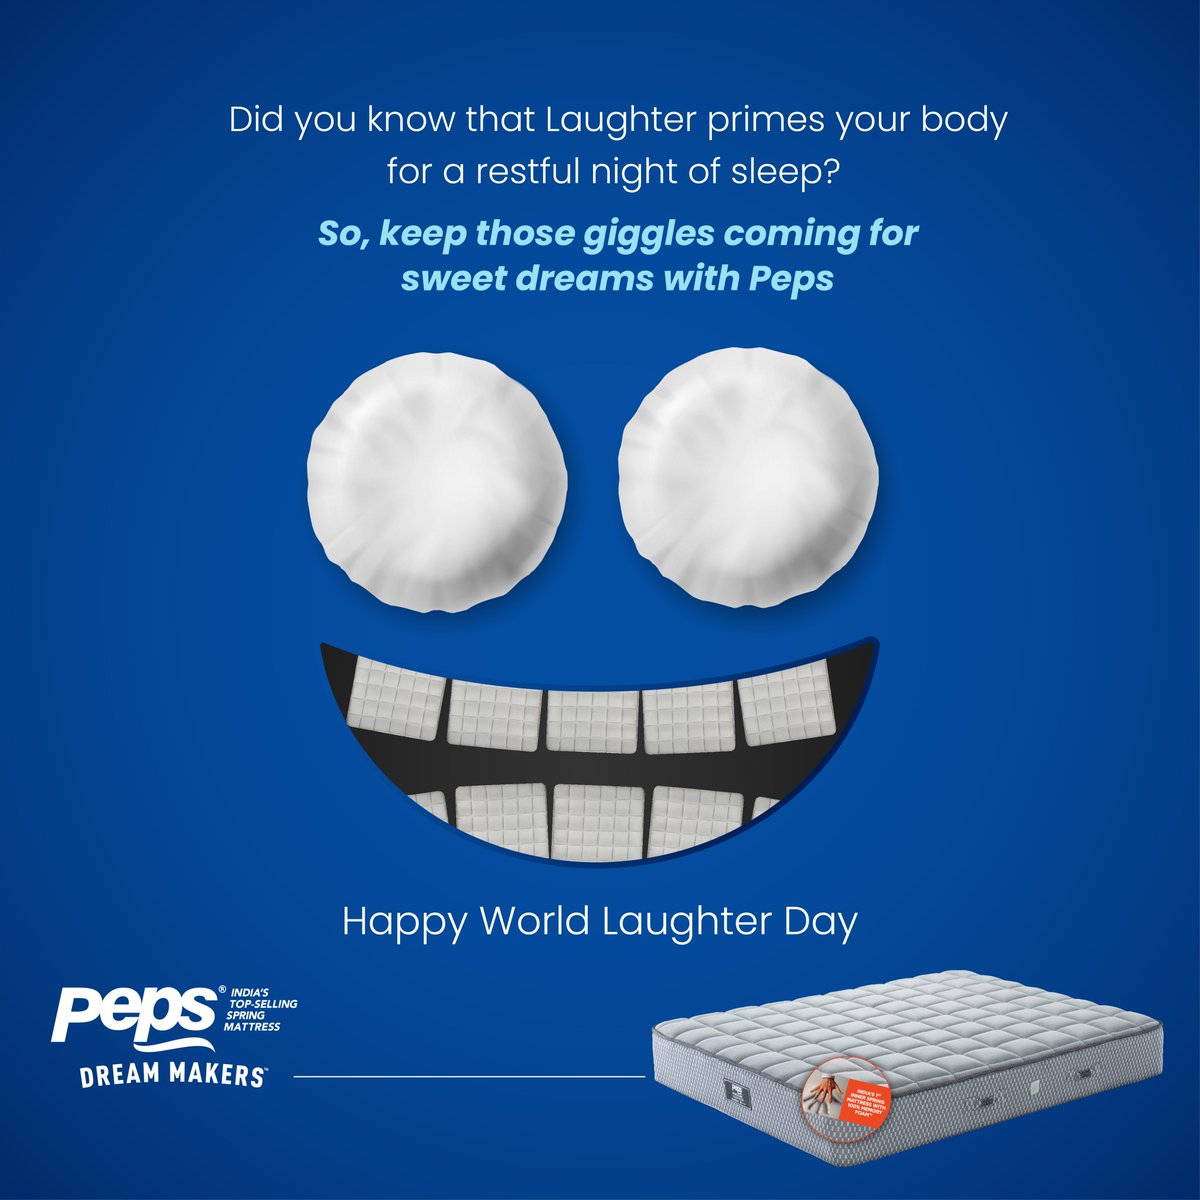 Get ready to LOL. Join us in celebrating World Laughter Day! Let's giggle our way to better sleep with Peps. 
#WorldLaughterDay #BetterSleep #Sleepwithsmiles #RestfulNights #Pepsmattress #DreamMakers #Peps